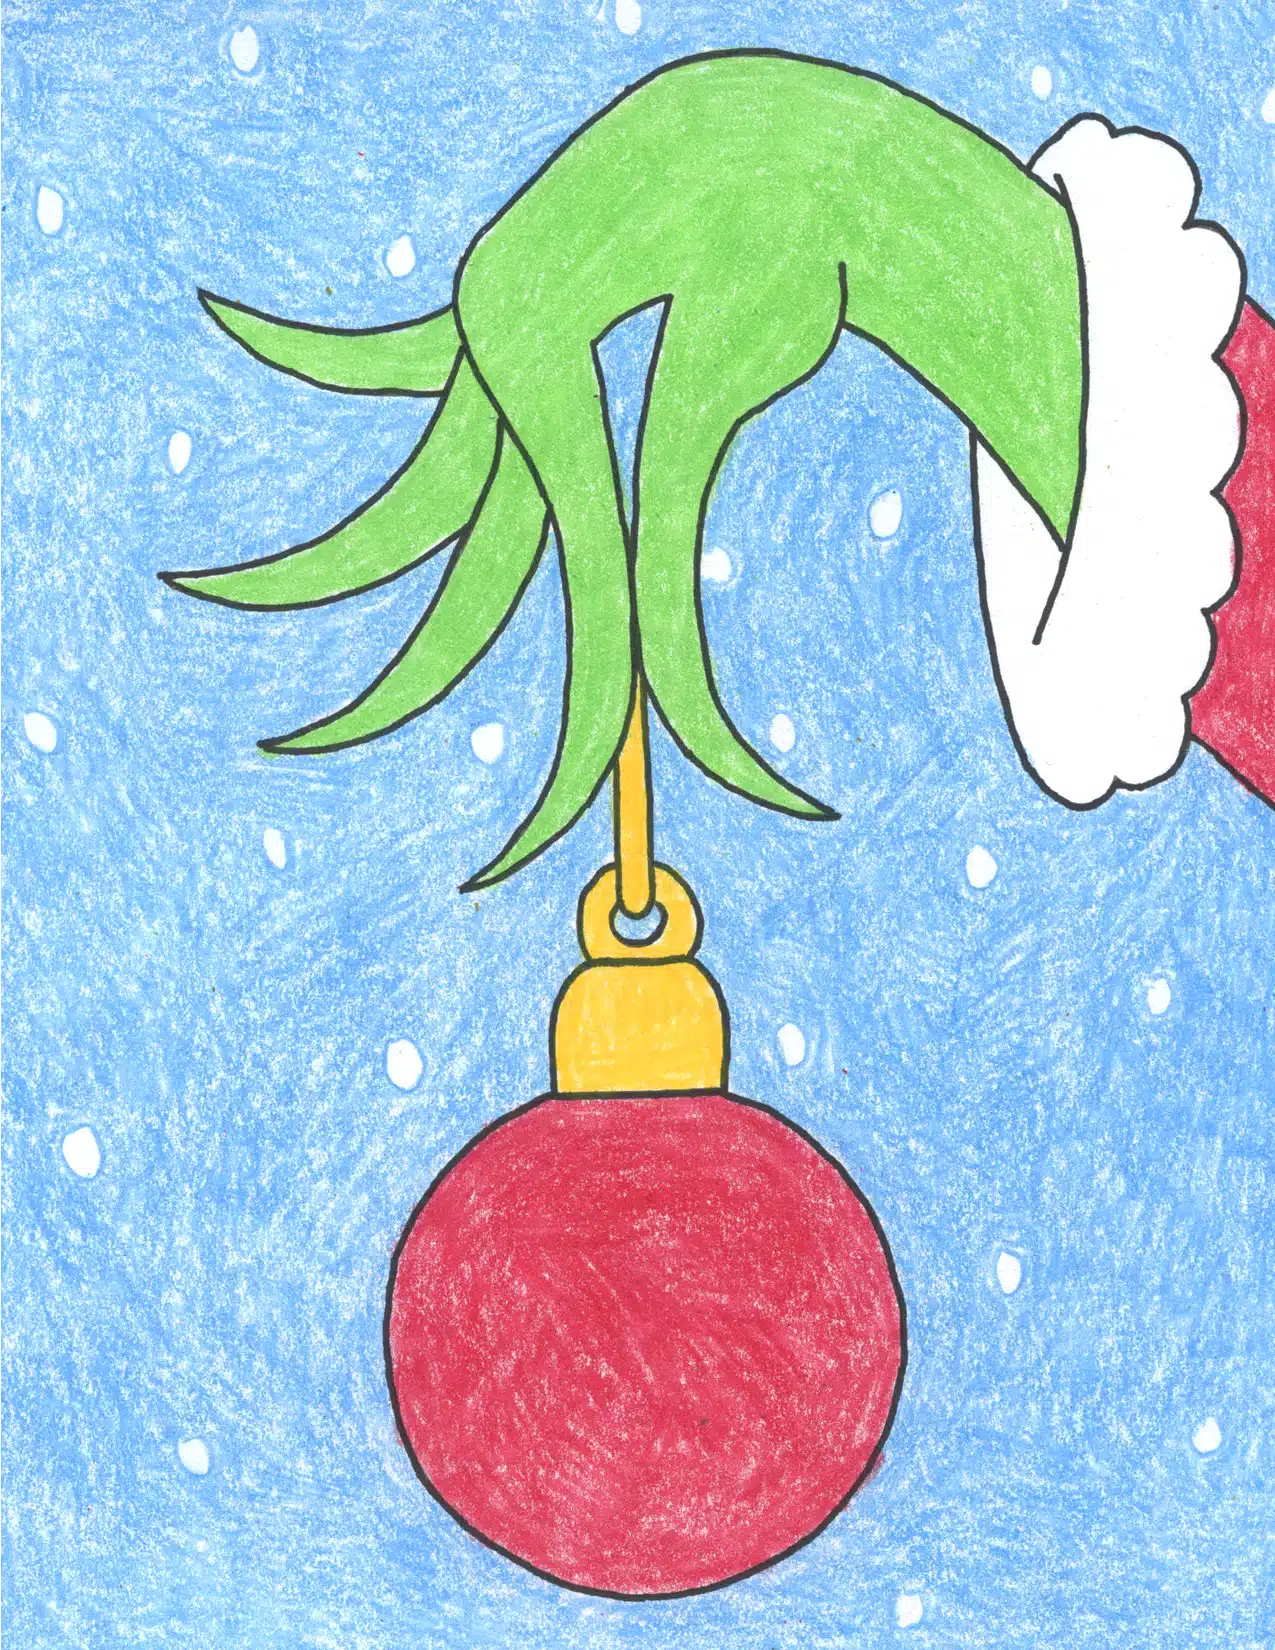 20 Best Christmas Drawing ideas [Easy For Children & Adults] – ATX Fine Arts-saigonsouth.com.vn